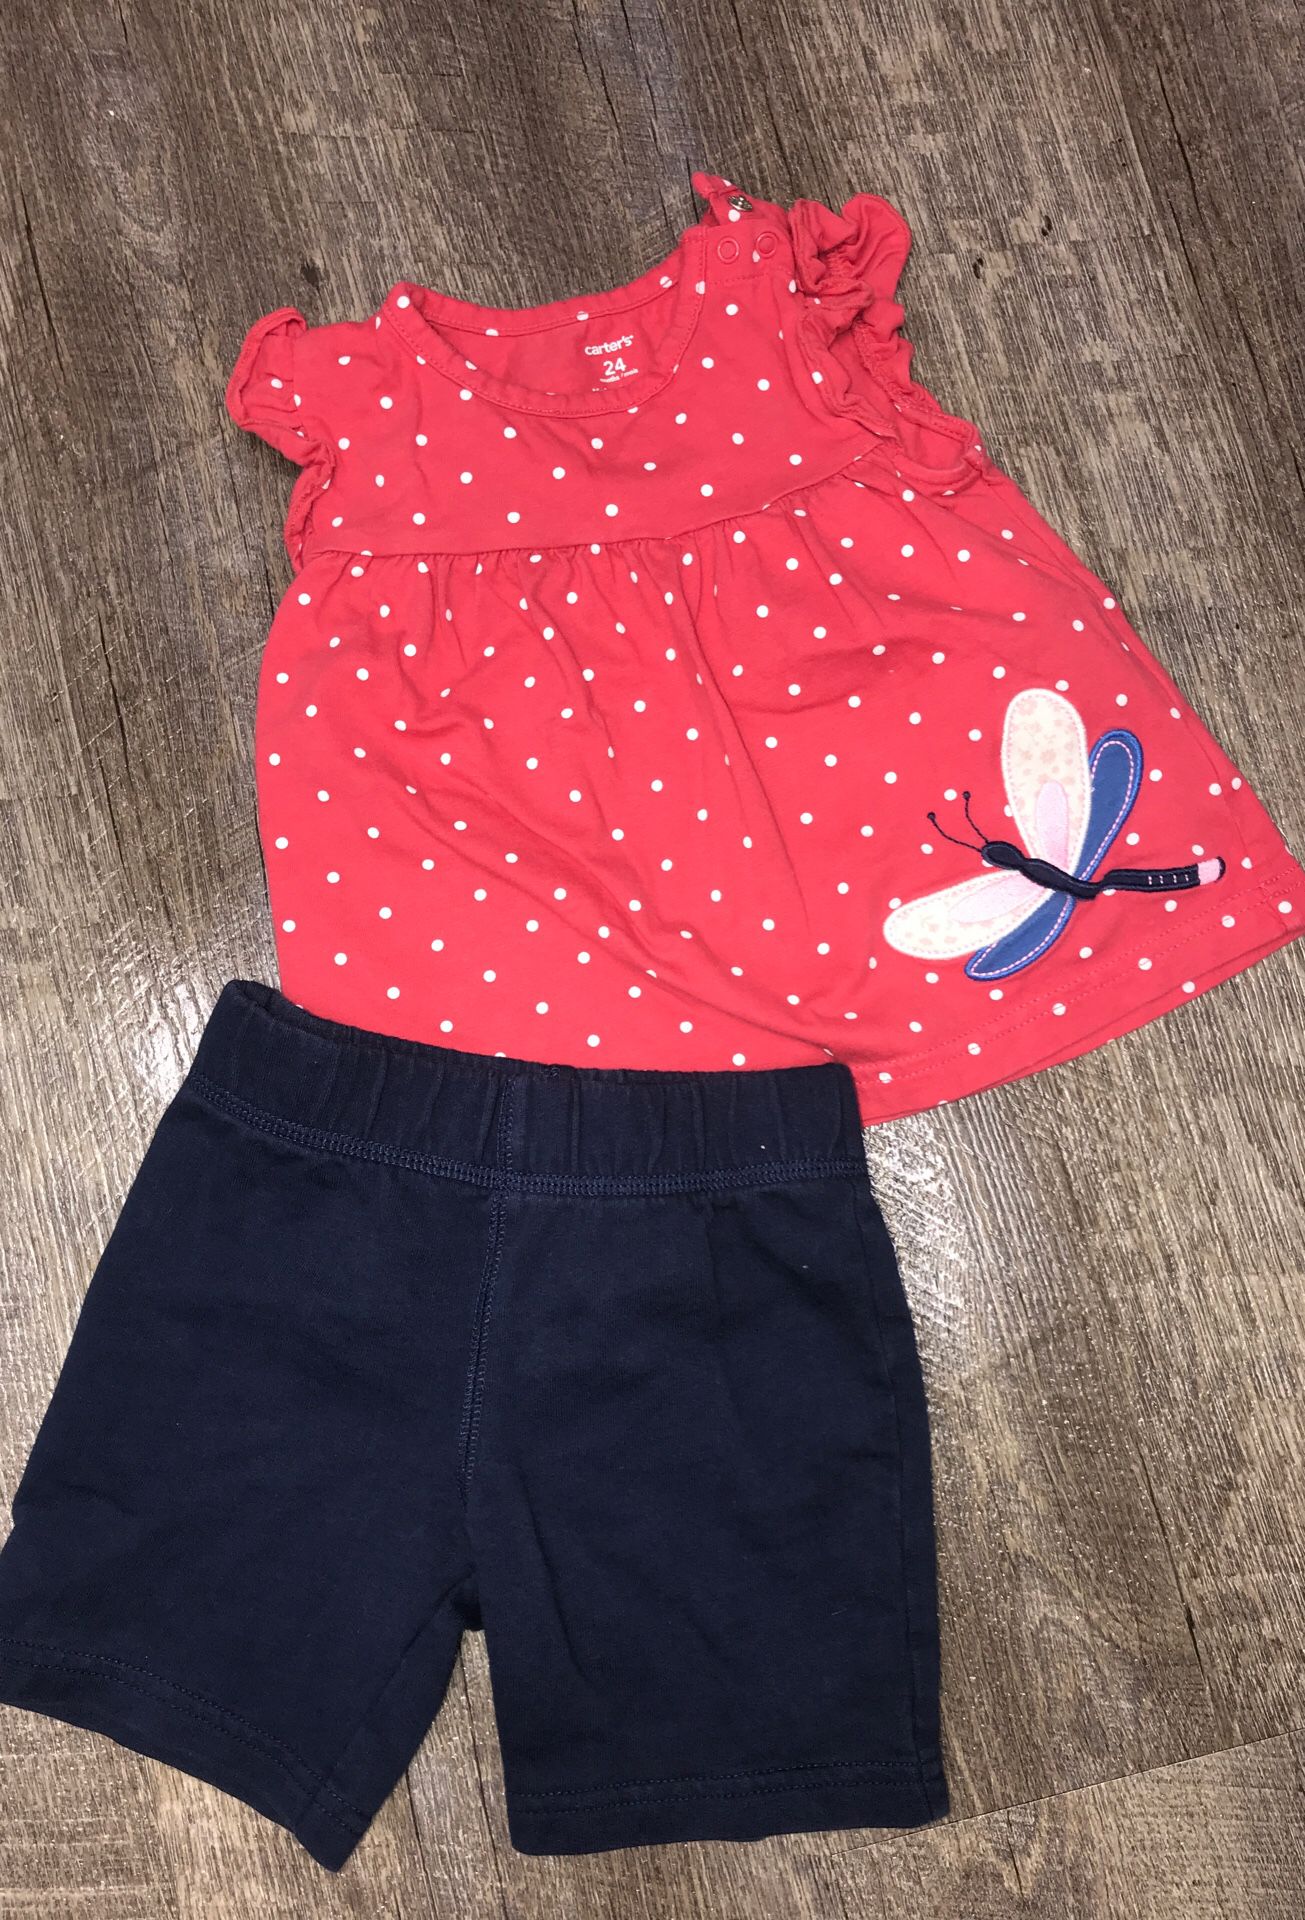 24 month Carters set